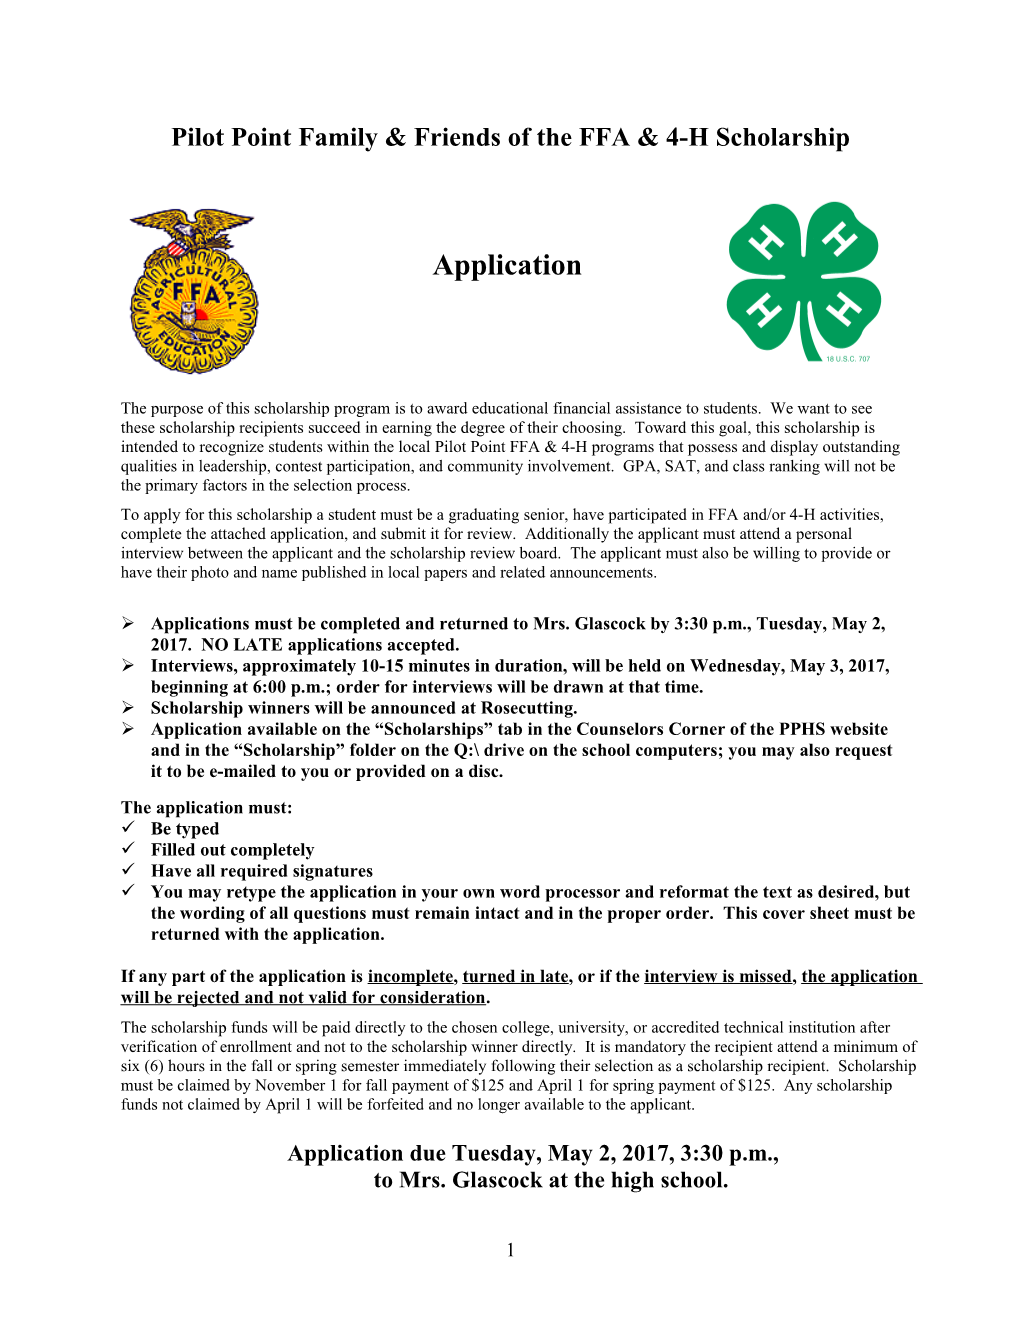 Pilot Point FFA- 4H Friends and Family Scholarship